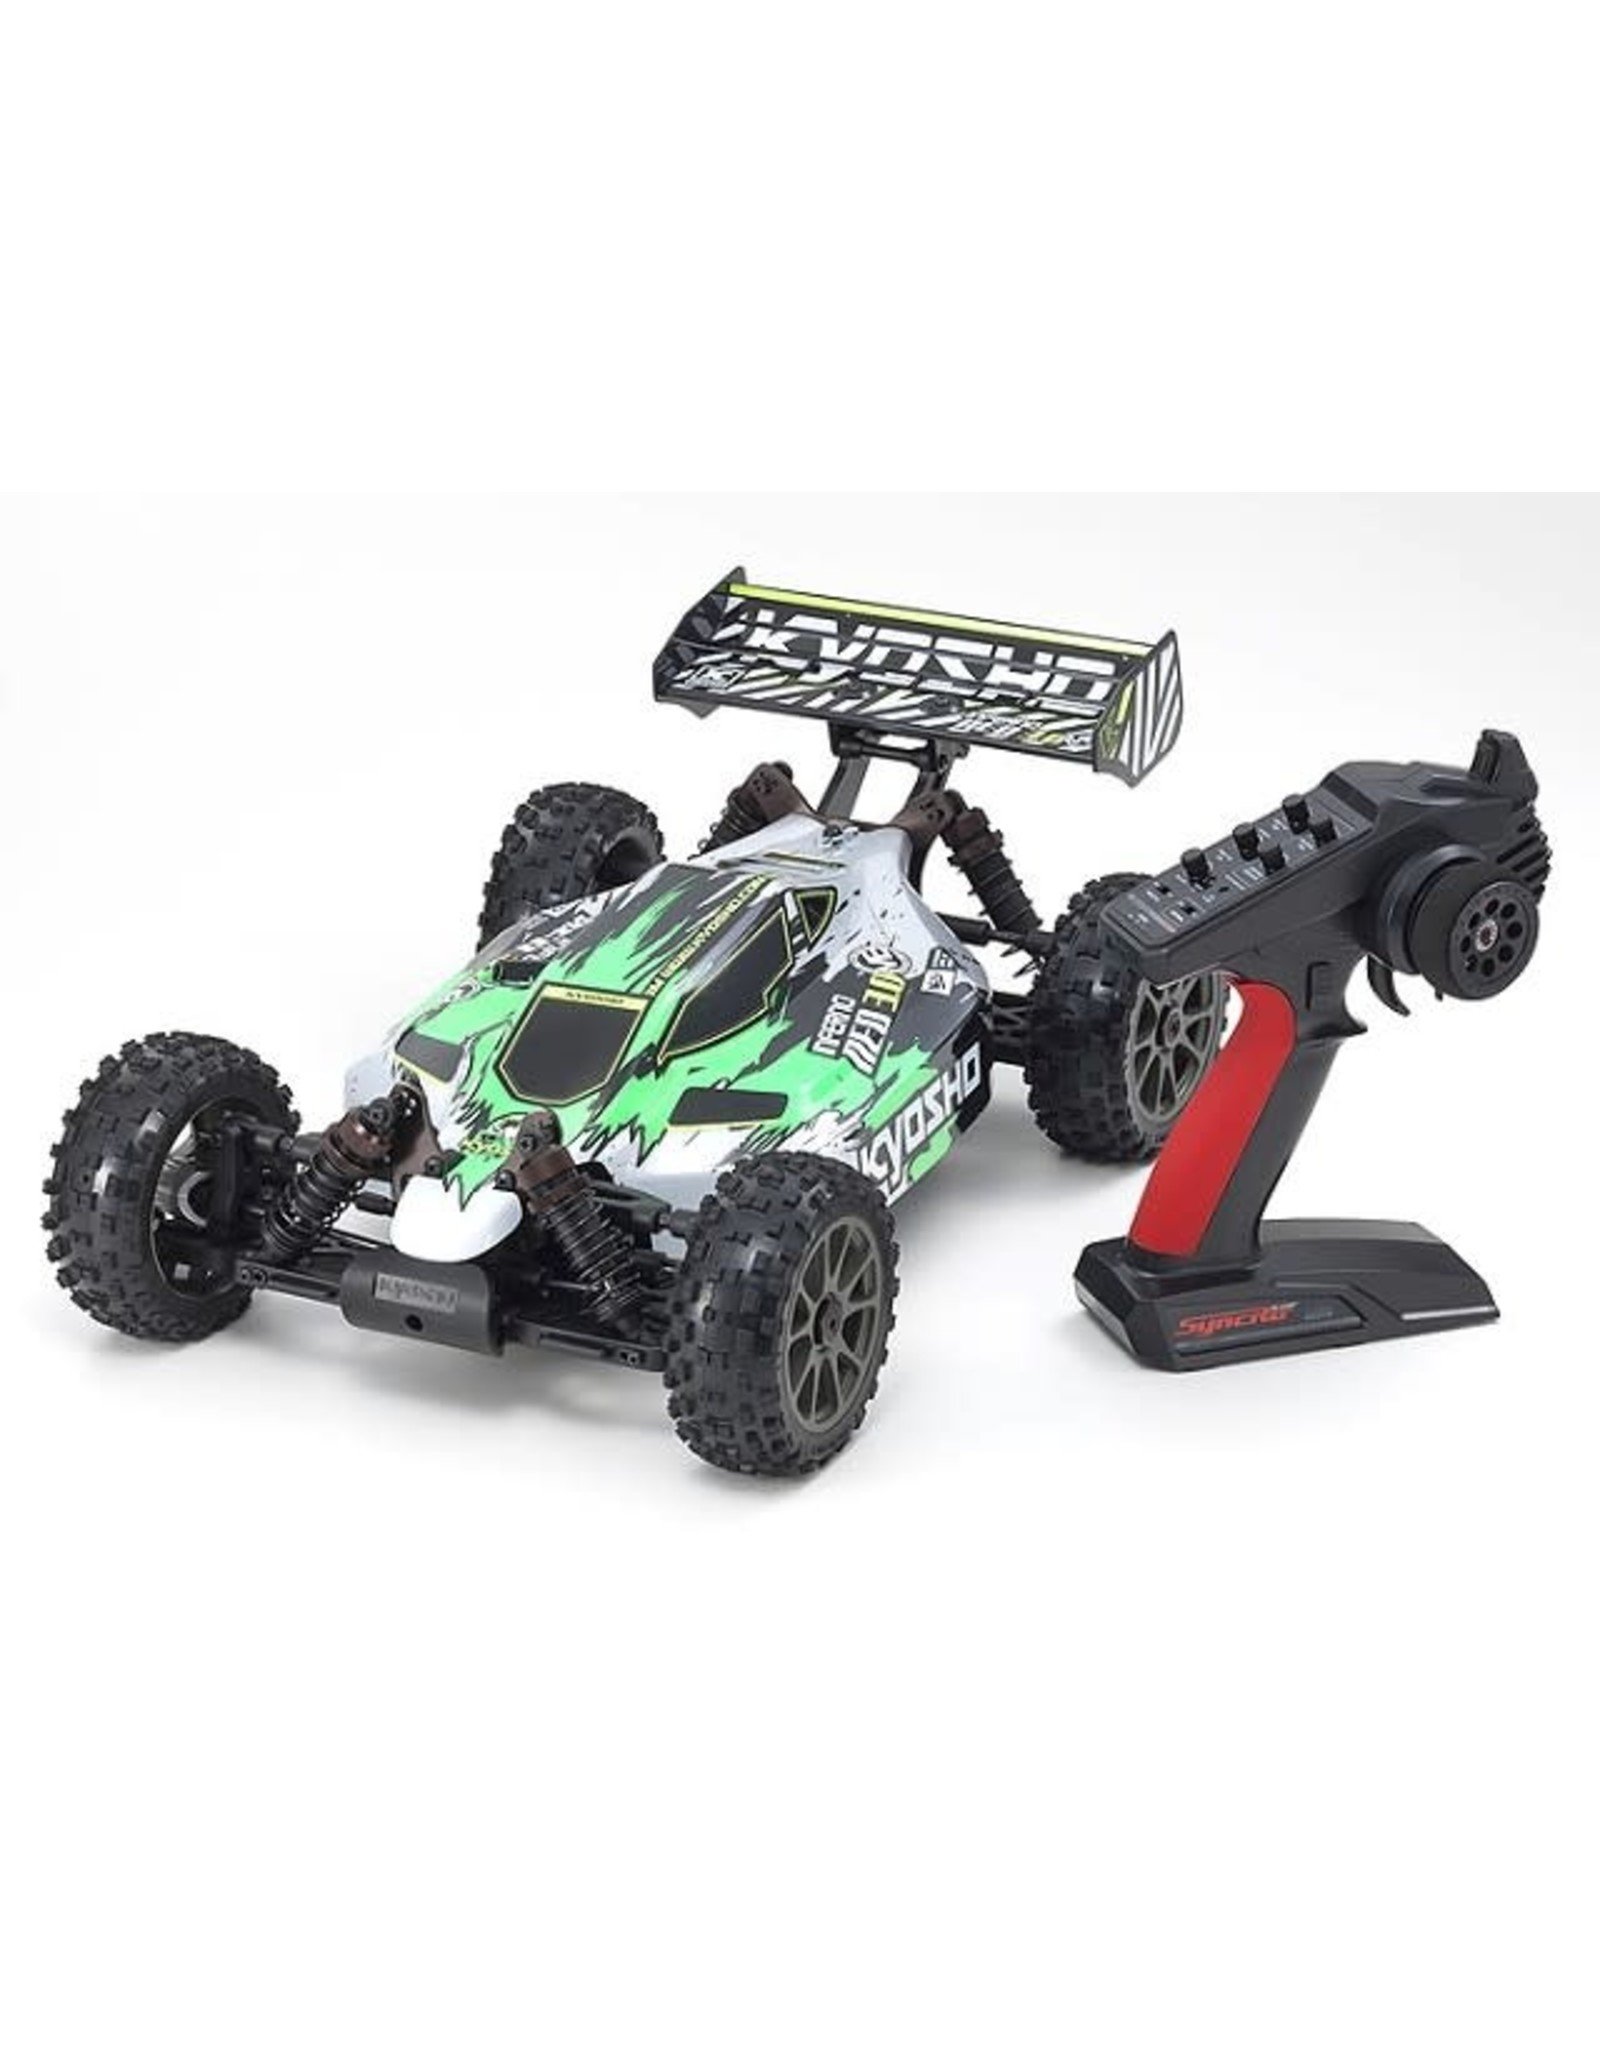 Kyosho Kyosho Inferno NEO 3.0 VE T1 Green 1:8 scale 4WD  34108T1